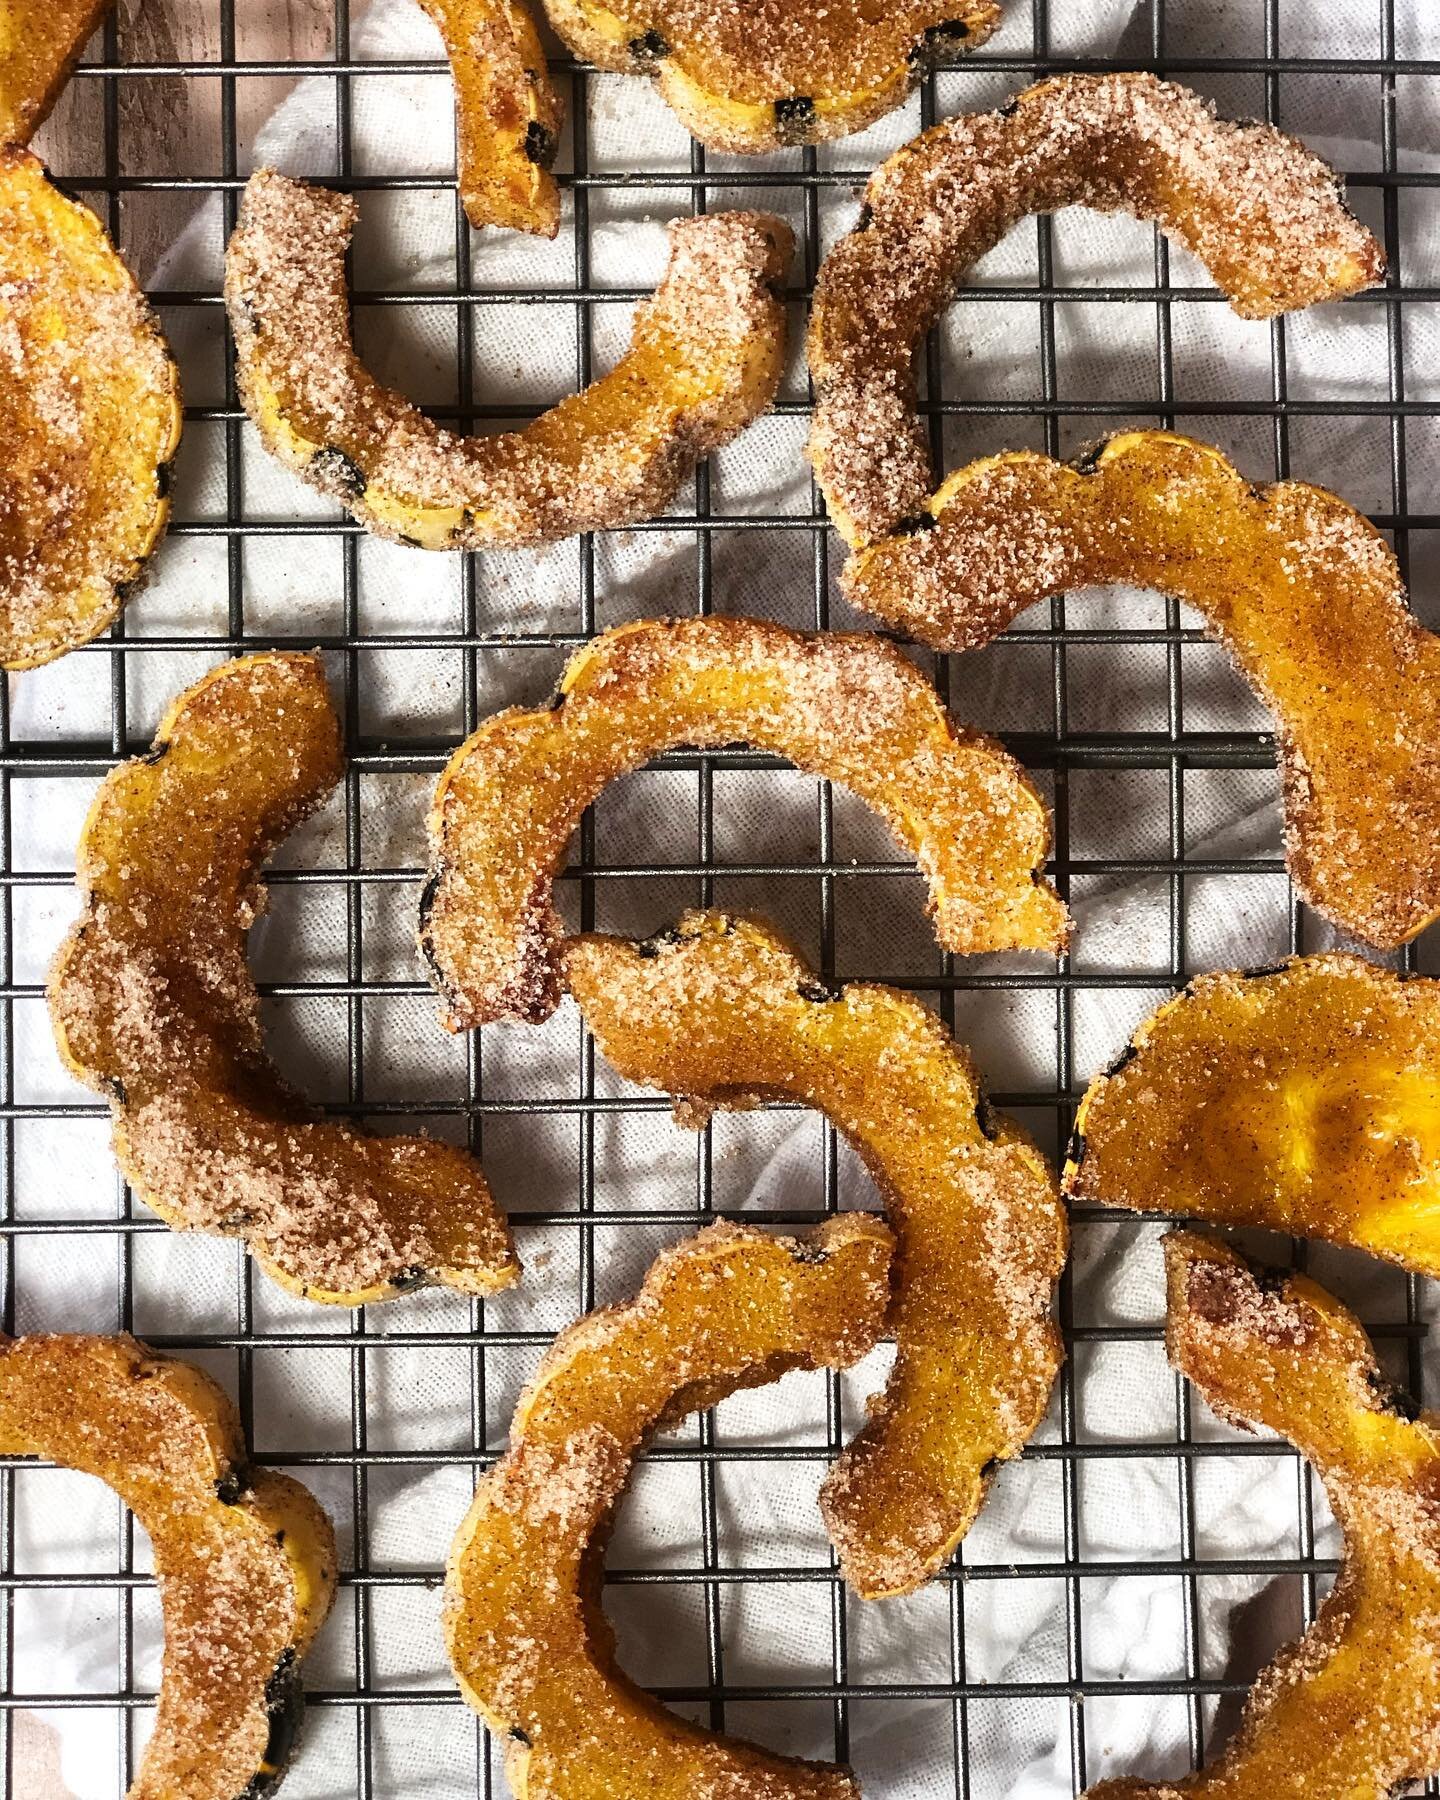 Like churros, but not.✨ 
My Cinnamon-Sugar Delicata Squash recipe is on the blog now! Plus sustainability tips, of course! 🌱
.
.
.
.
#sustainedkitchen #sustainablefood #dessert #churros #delicatasquash #sweet #baking #delicata #foodphotography #food